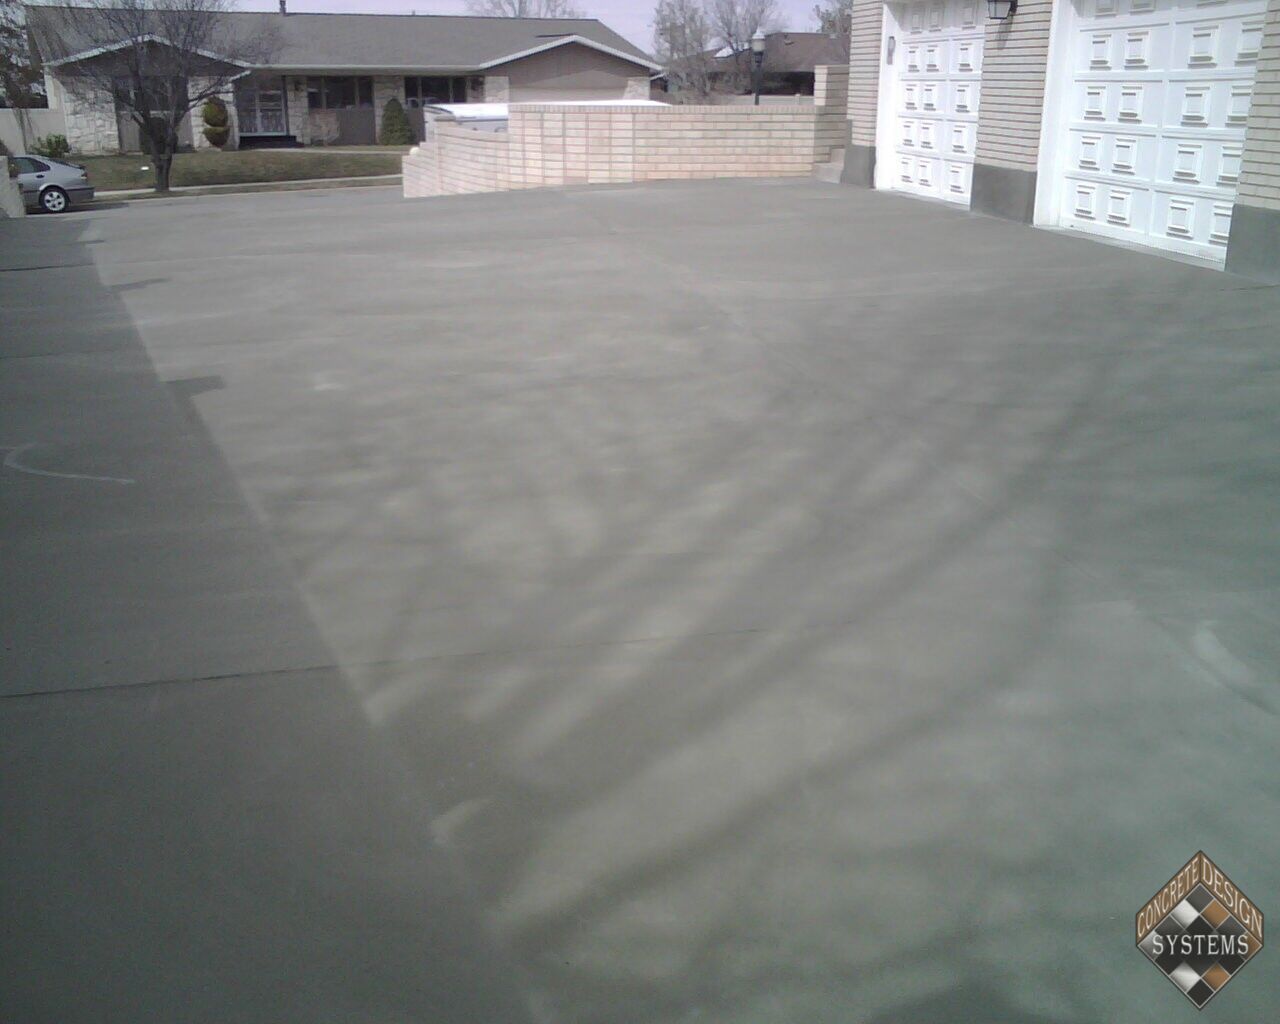 Driveway-Overlay-In-Plain-Gray